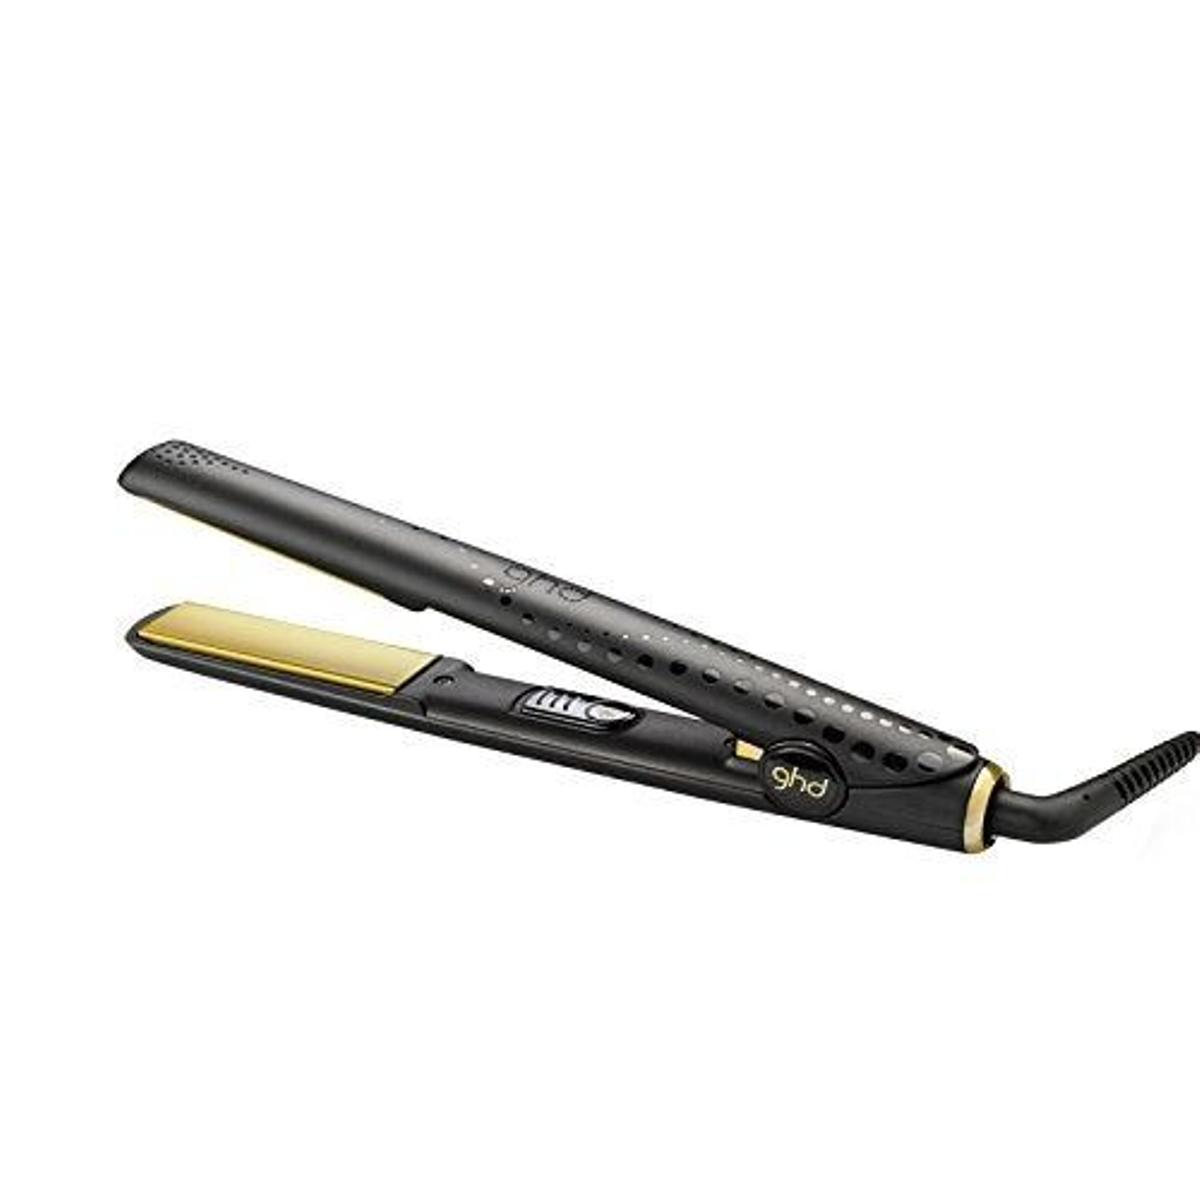 GHD V Gold Professional Classic Styler